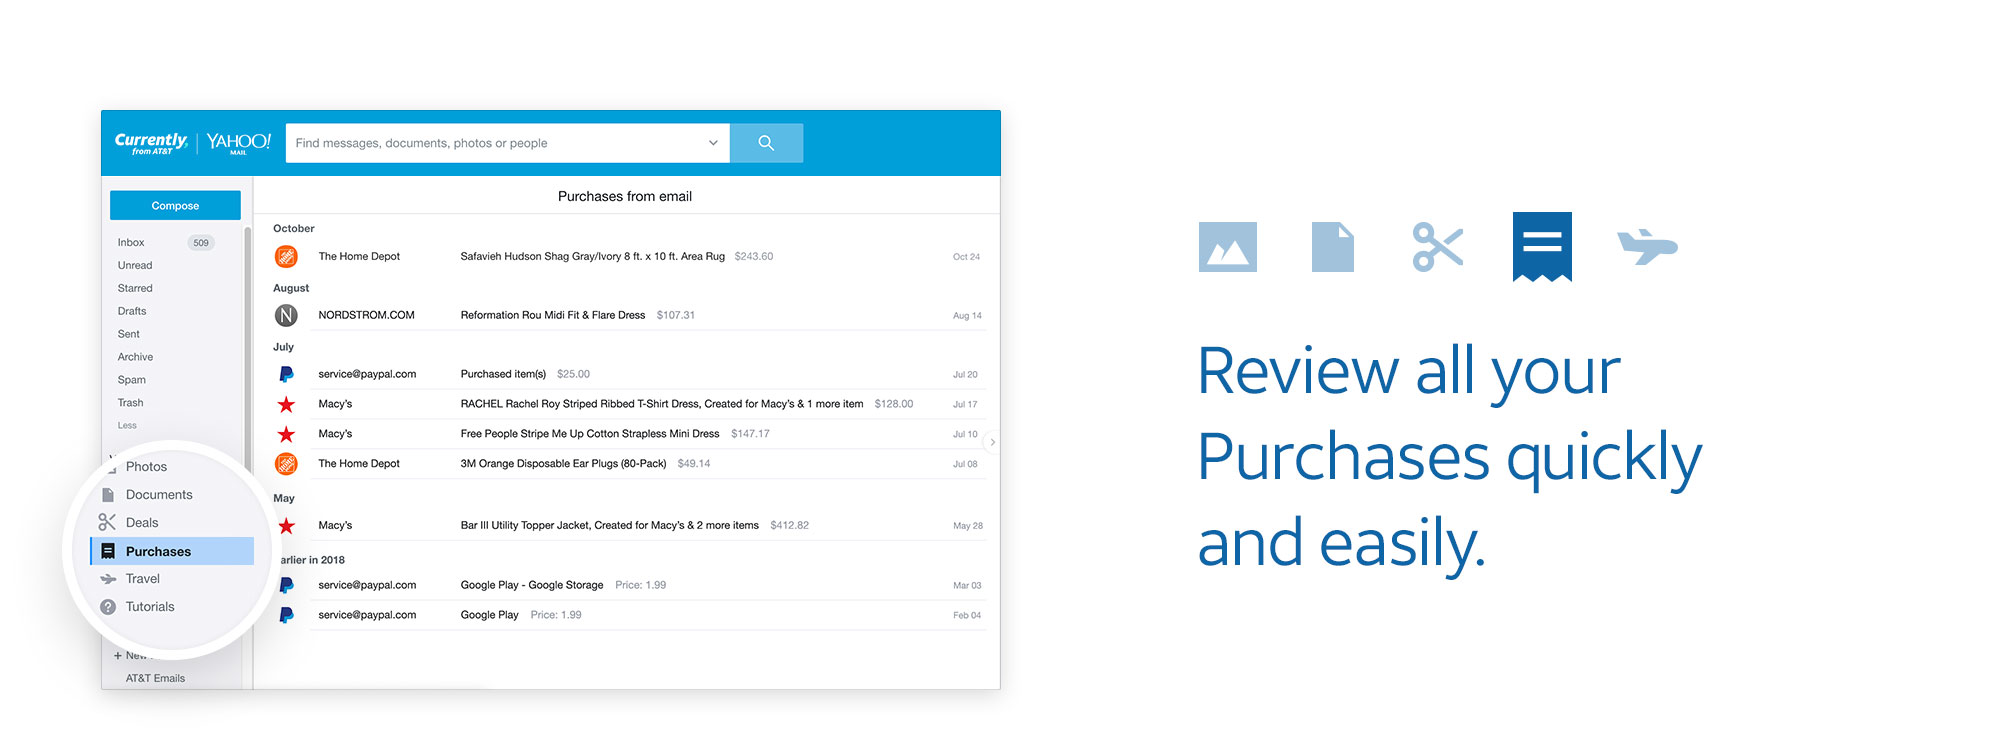 Review all your purchases quickly and easily with Currently, from AT&T email